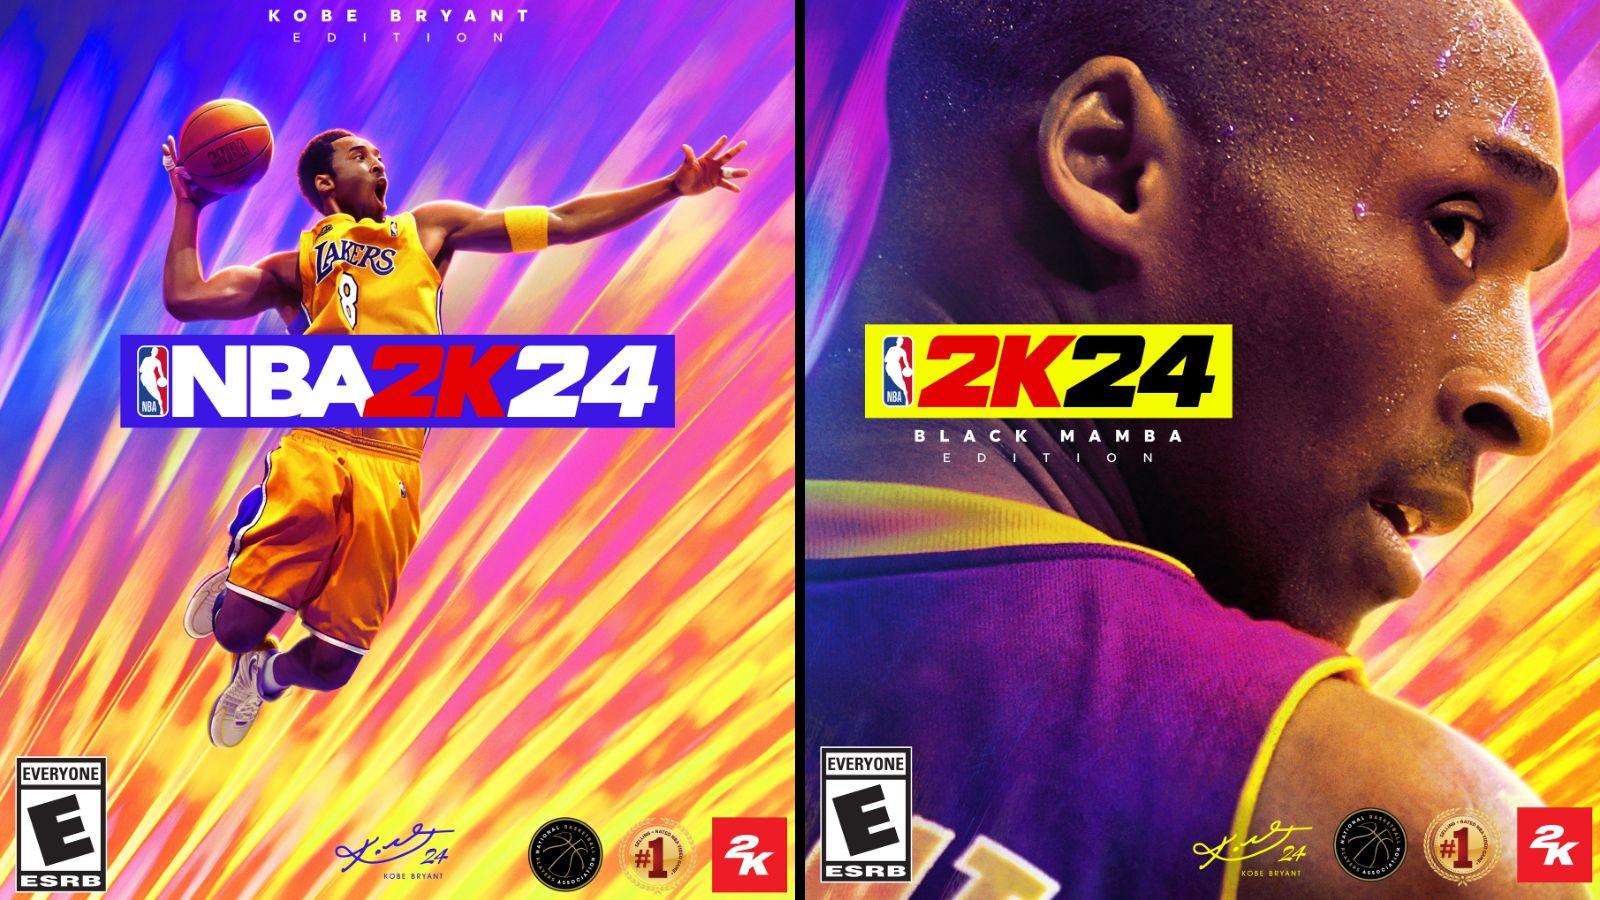 NBA 2K24 honors the iconic Kobe Bryant as this year’s cover athlete